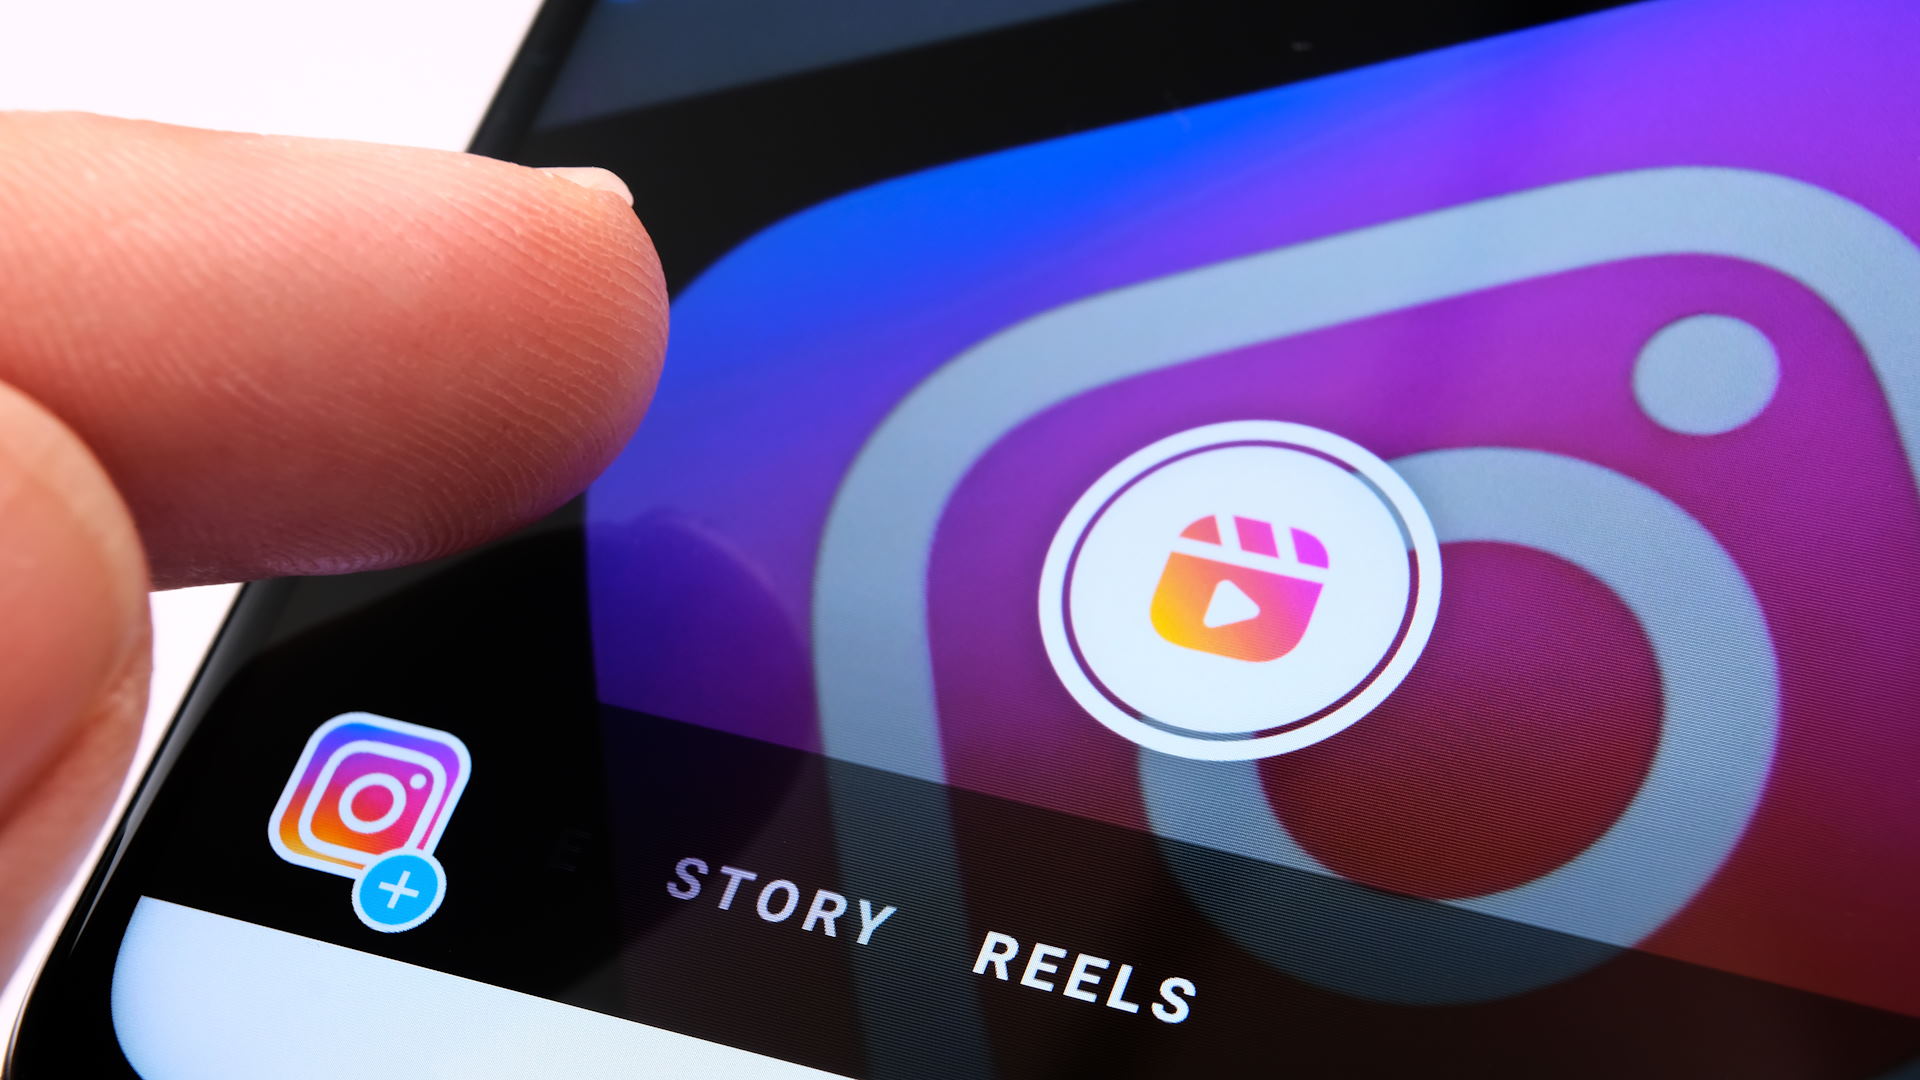 Instagram is experimenting with 10-minute long Reels recordings in a trial run.